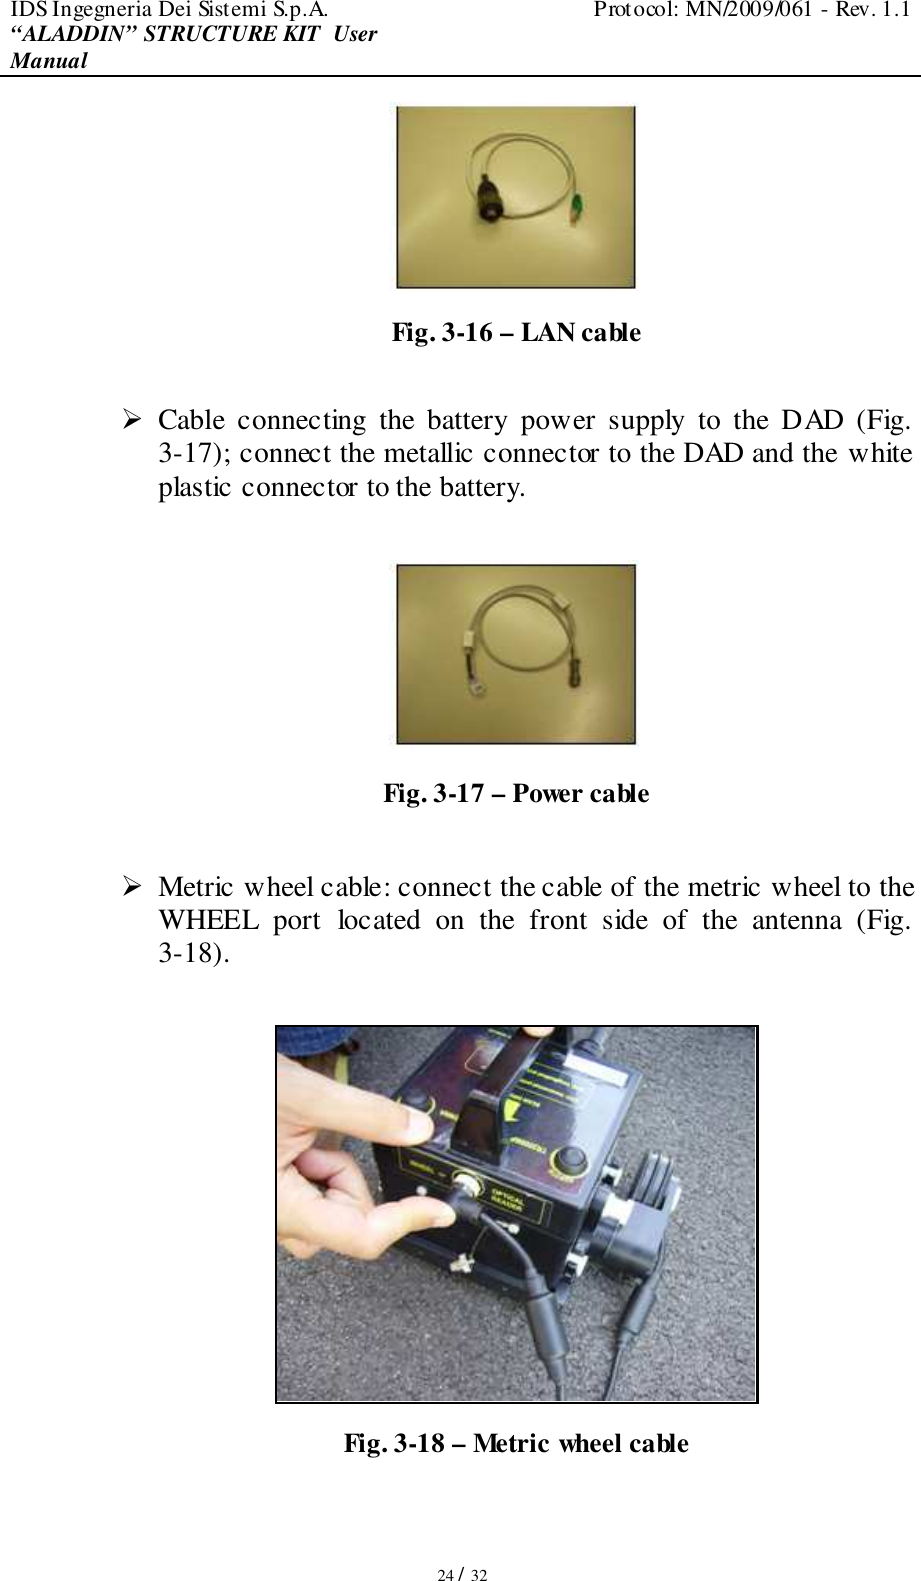 IDS Ingegneria Dei Sistemi S.p.A.  Protocol: MN/2009/061 - Rev. 1.1 “ALADDIN” STRUCTURE KIT  User Manual   24 / 32  Fig. 3-16 – LAN cable   Cable  connecting  the  battery  power  supply  to  the  DAD  (Fig. 3-17); connect the metallic connector to the DAD and the white plastic connector to the battery.    Fig. 3-17 – Power cable   Metric wheel cable: connect the cable of the metric wheel to the WHEEL  port  located  on  the  front  side  of  the  antenna  (Fig. 3-18).   Fig. 3-18 – Metric wheel cable 